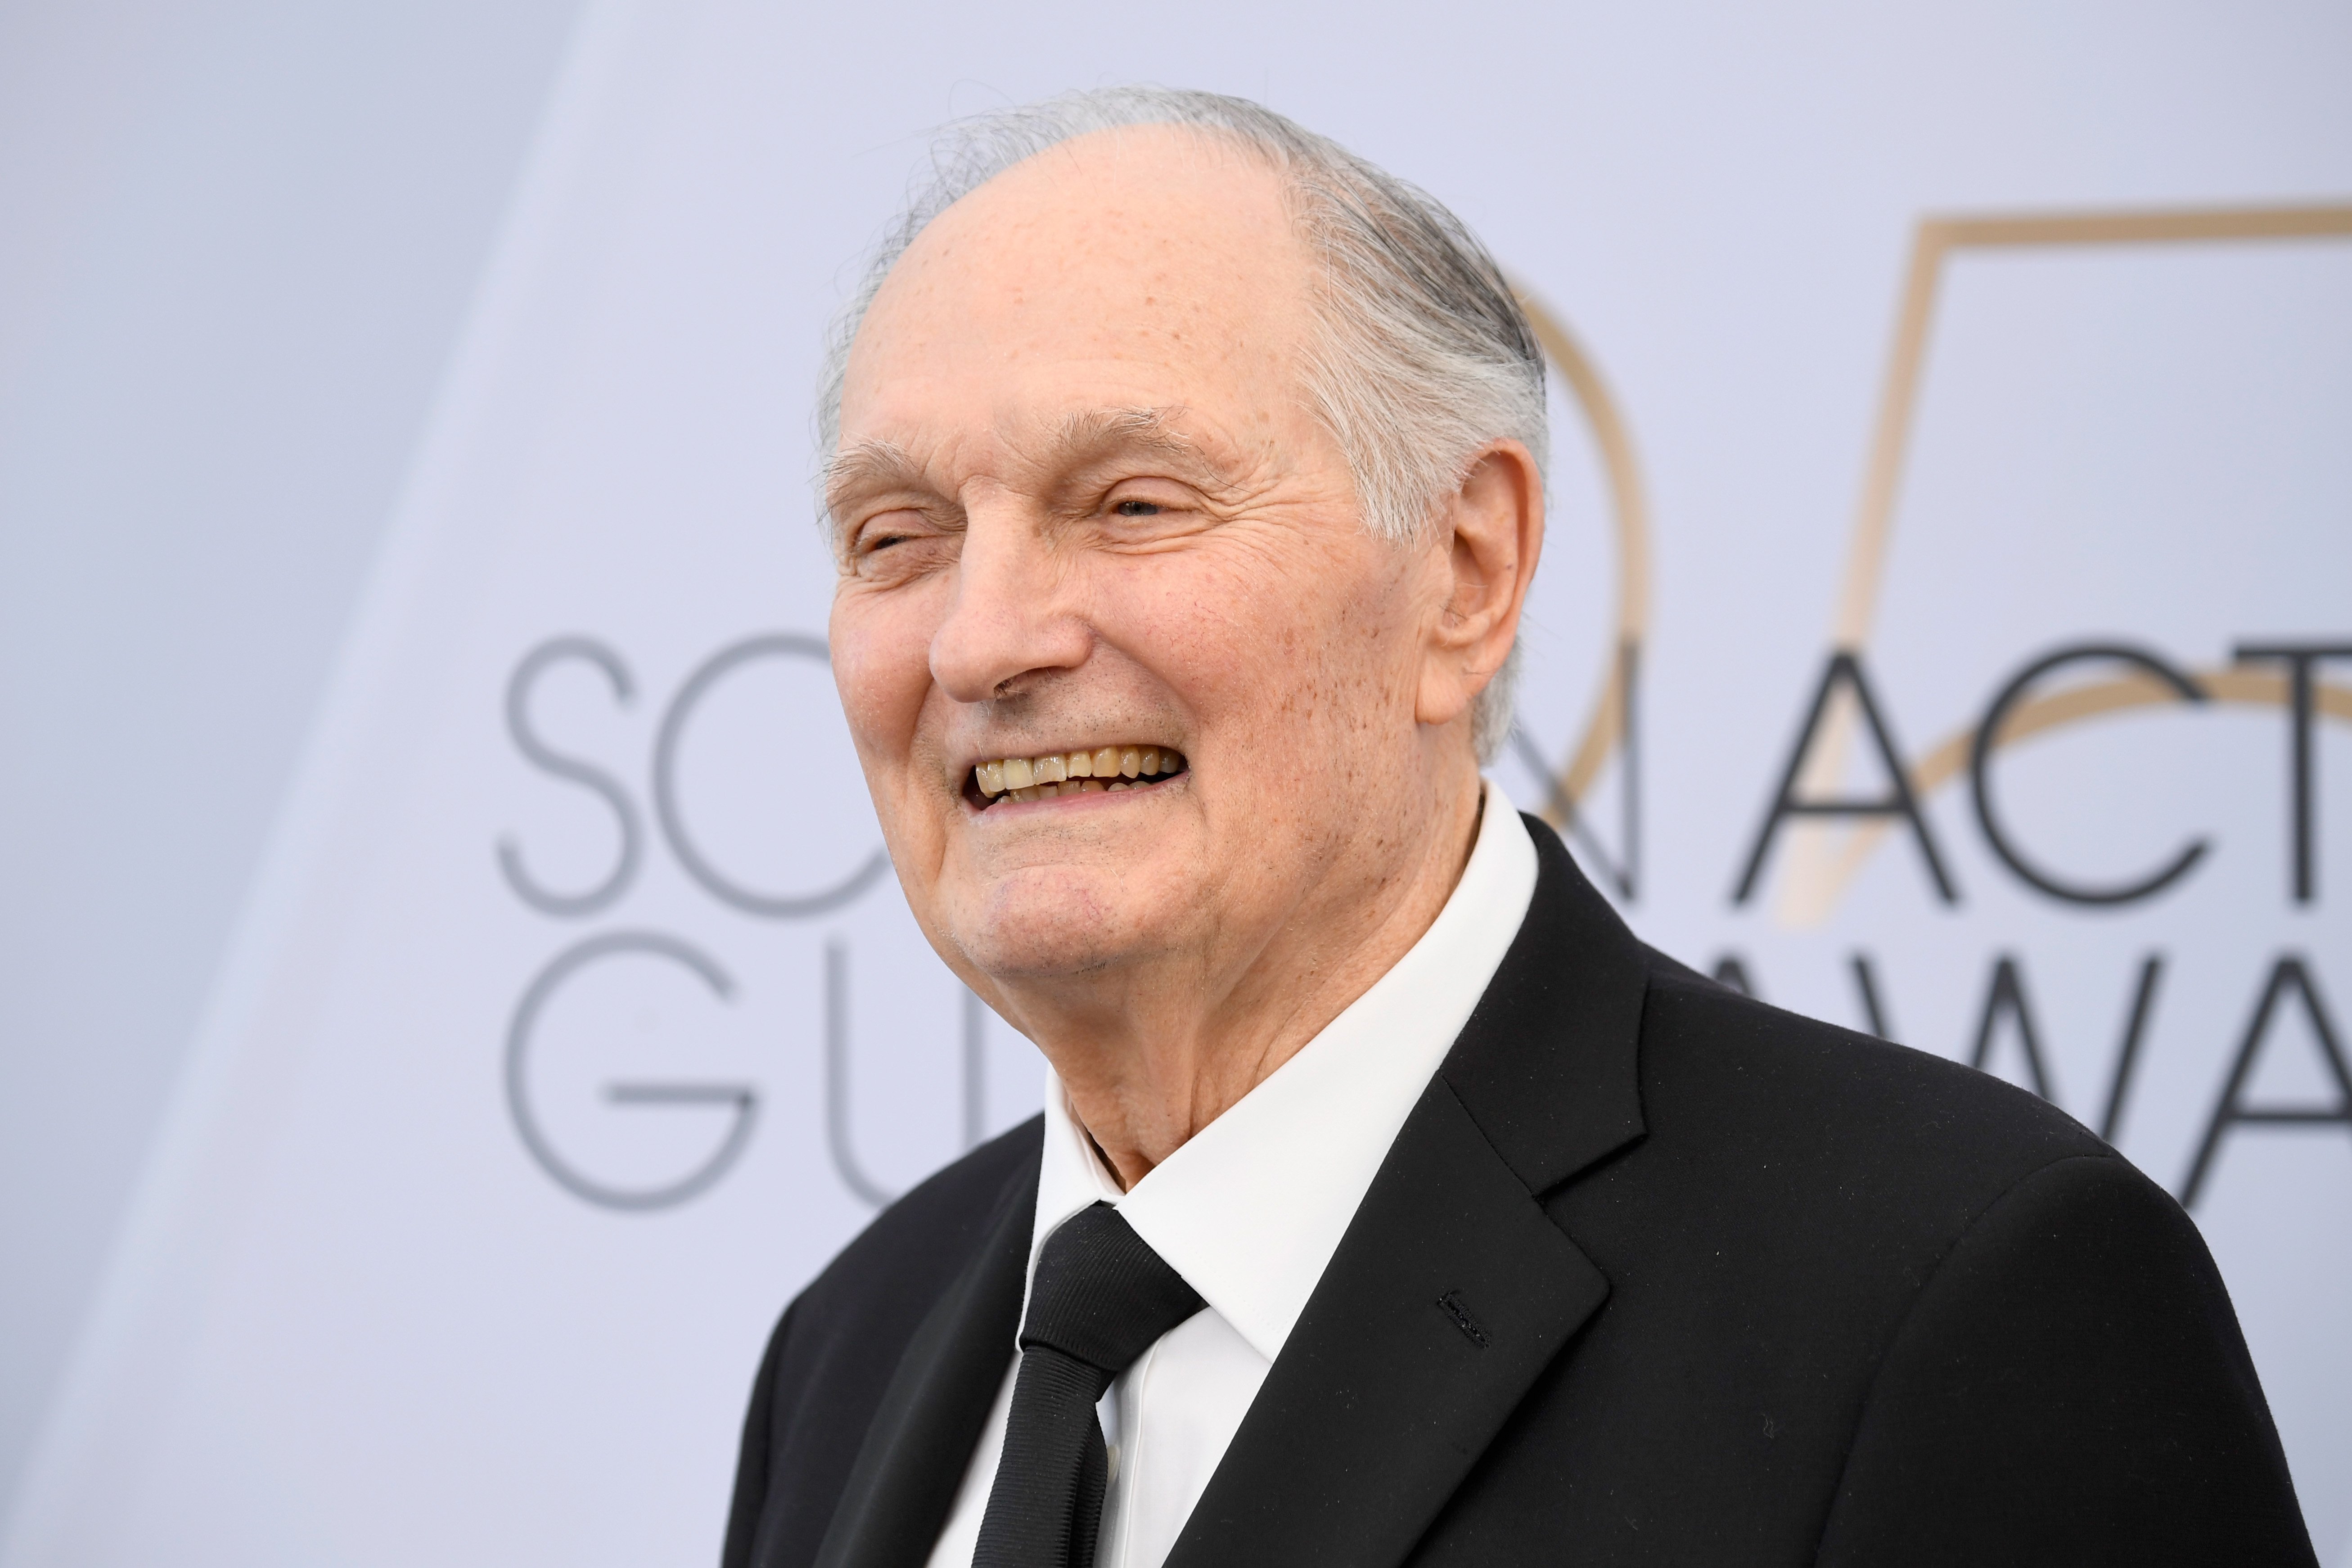 Alan Alda pictured at the 25th Annual Screen Actors Guild Awards at The Shrine Auditorium, 2019, Los Angeles, California. | Source: Getty Images